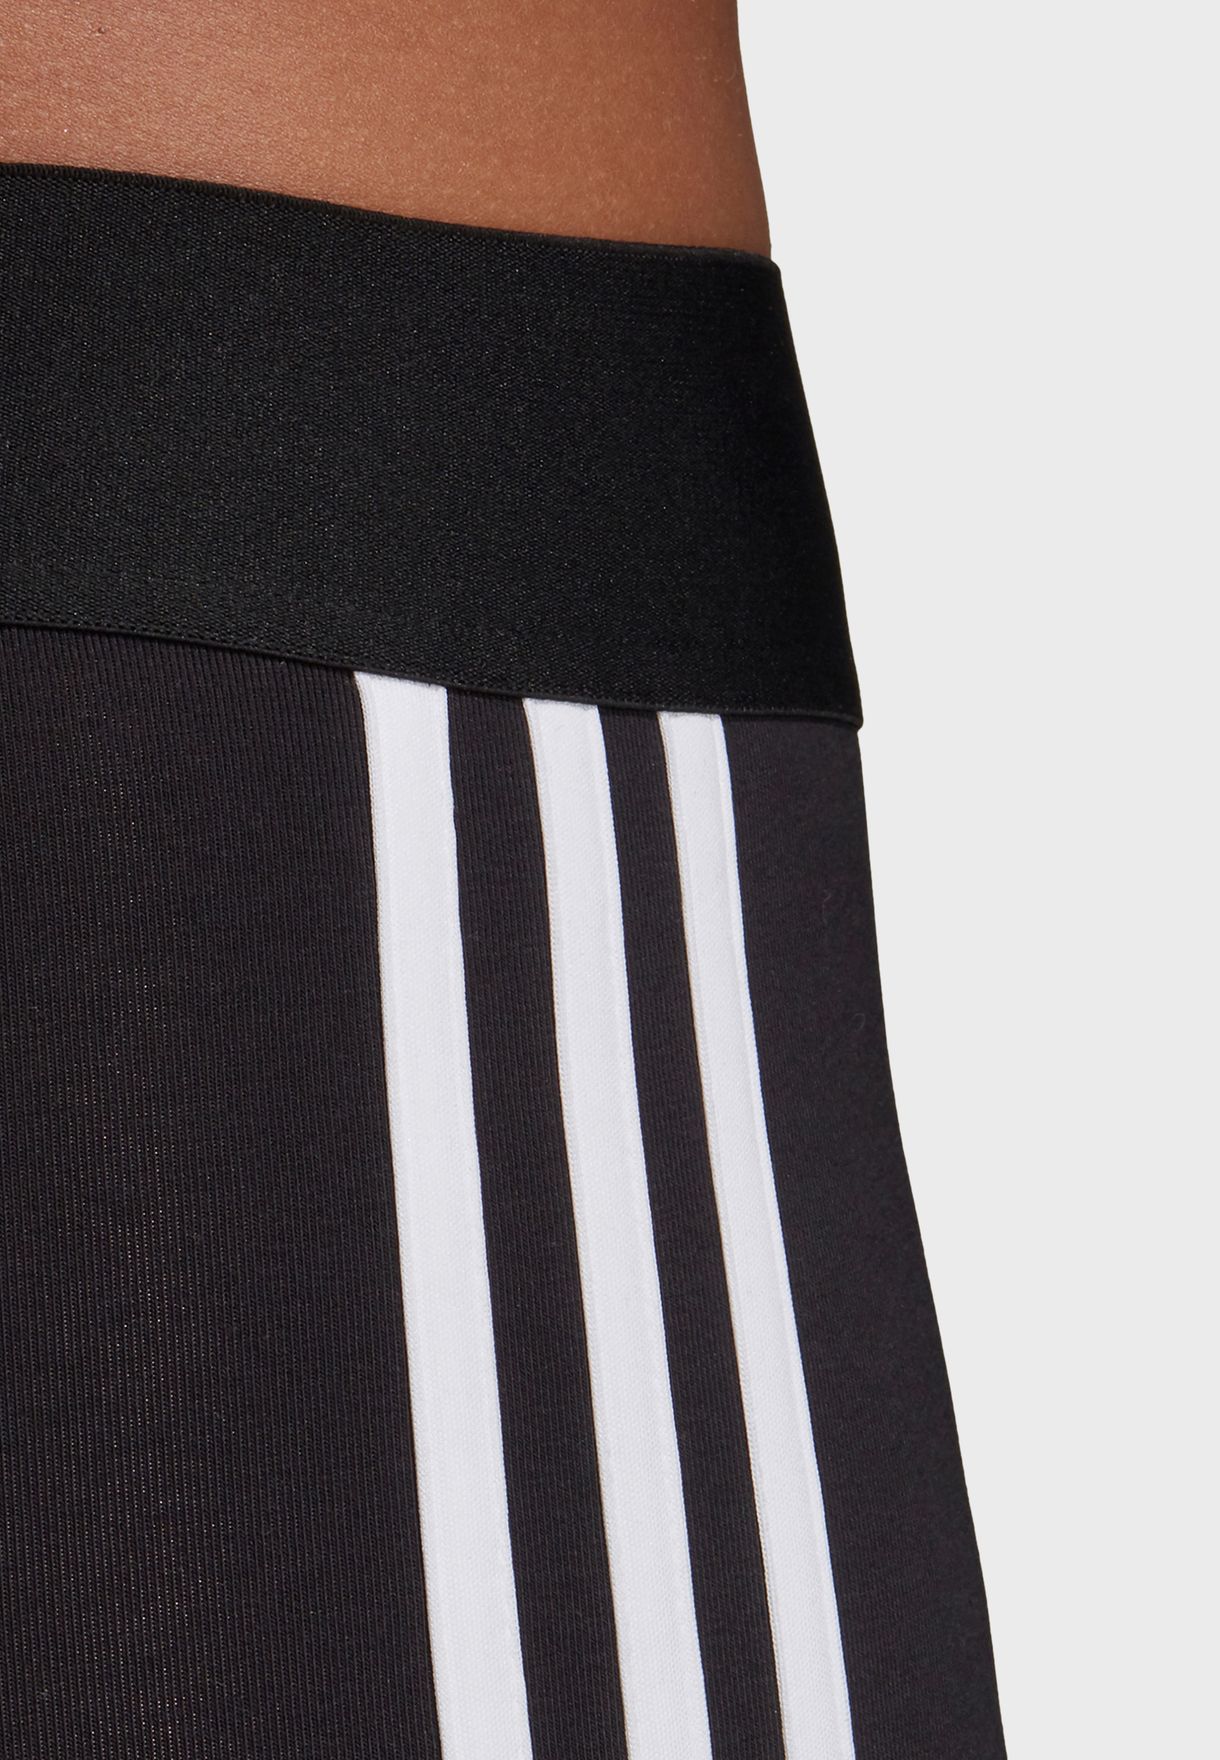 Must Have 3 Stripe Shorts